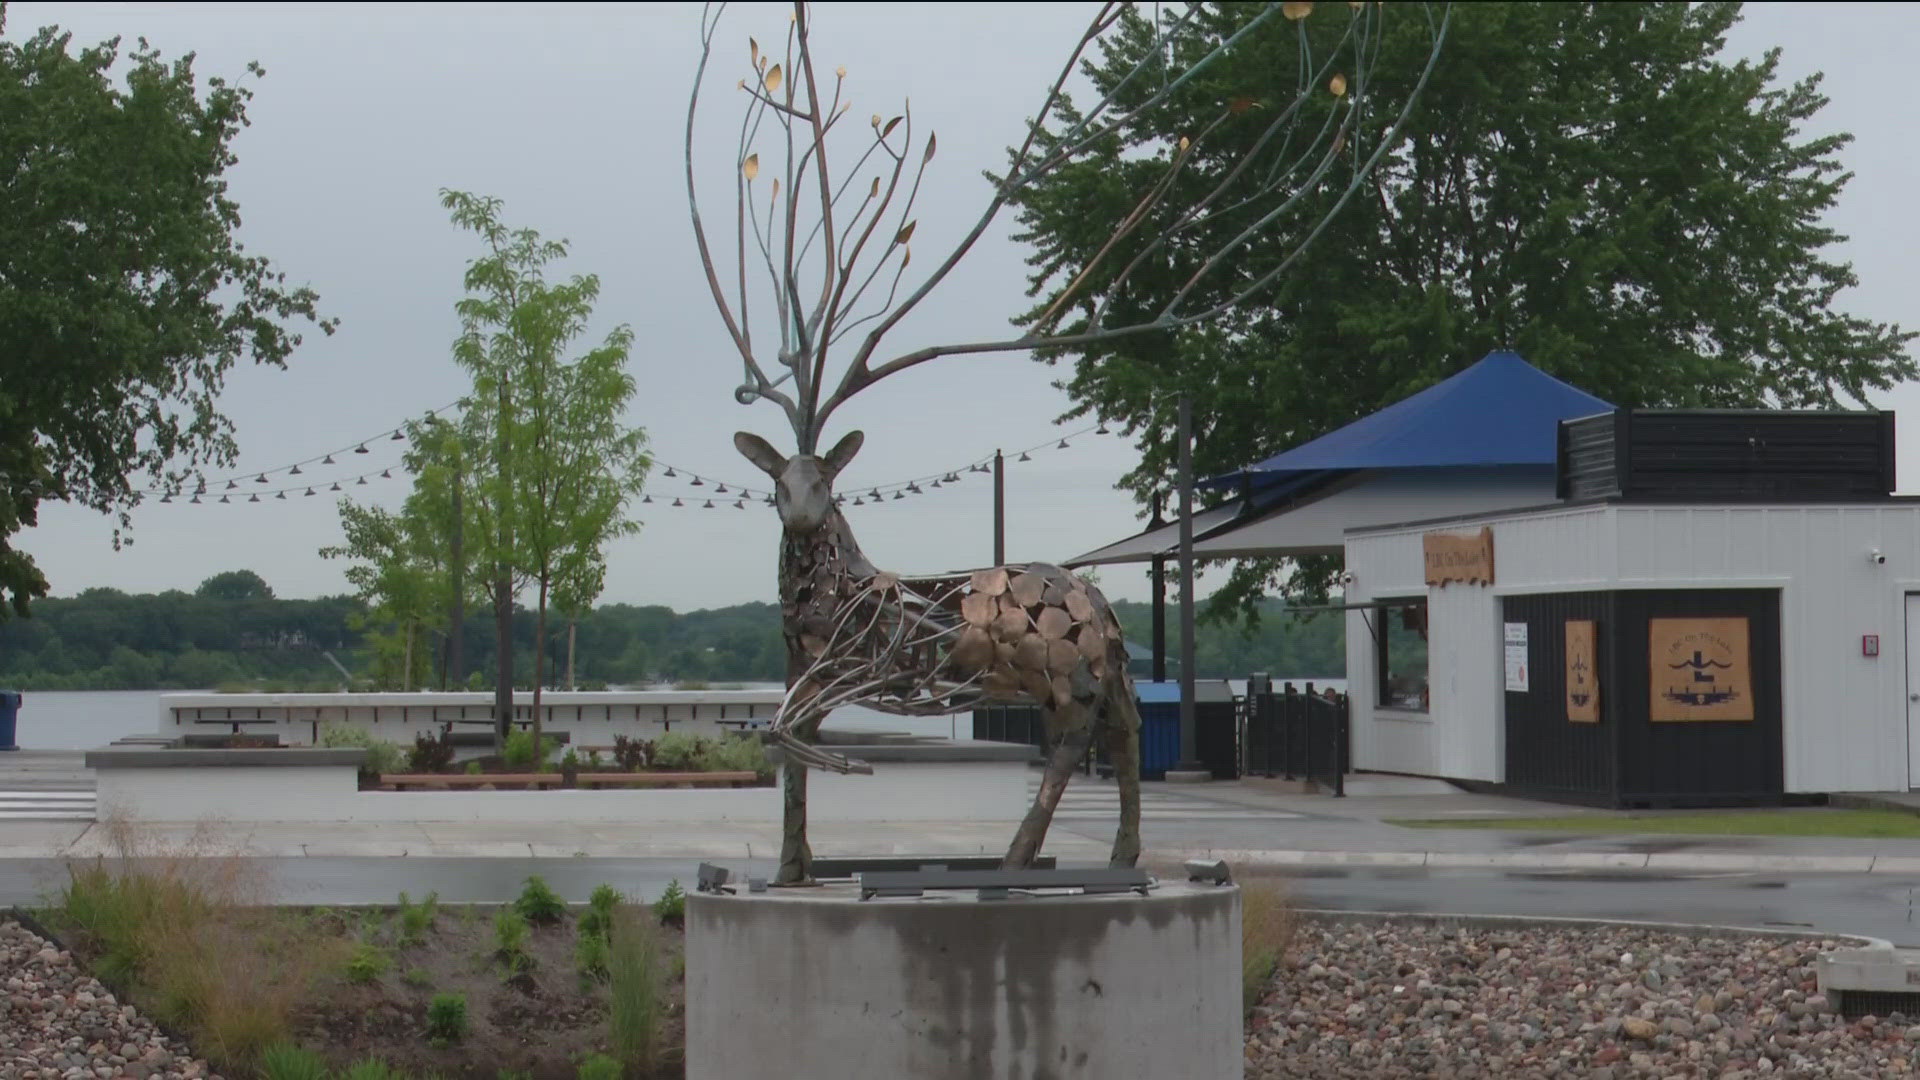 Lakeville Mayor Luke Hellier said voters chose to invest in city parks, like the newly revamped Antlers Parks, which we just happened to catch on a rainy day.